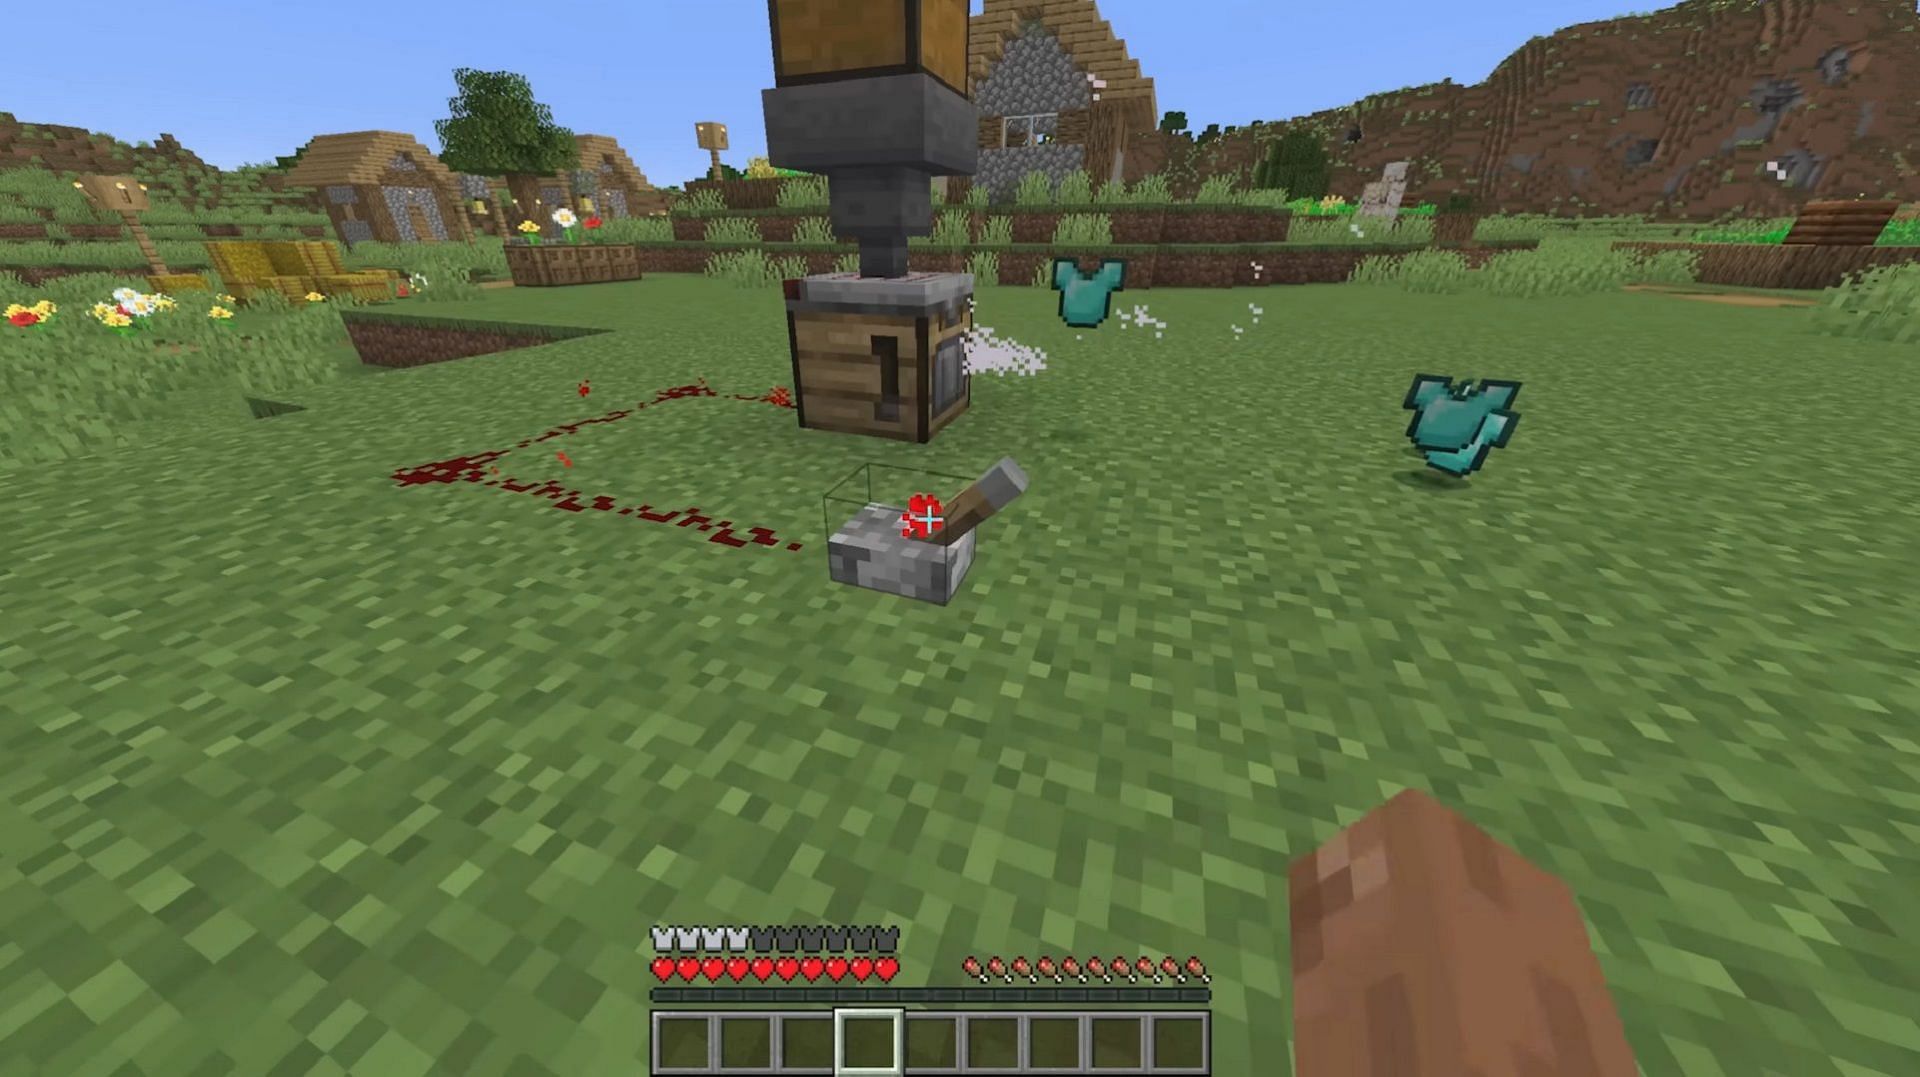 The crafter block introduces an automatic crafting mechanic to Minecraft (Image via Mojang)